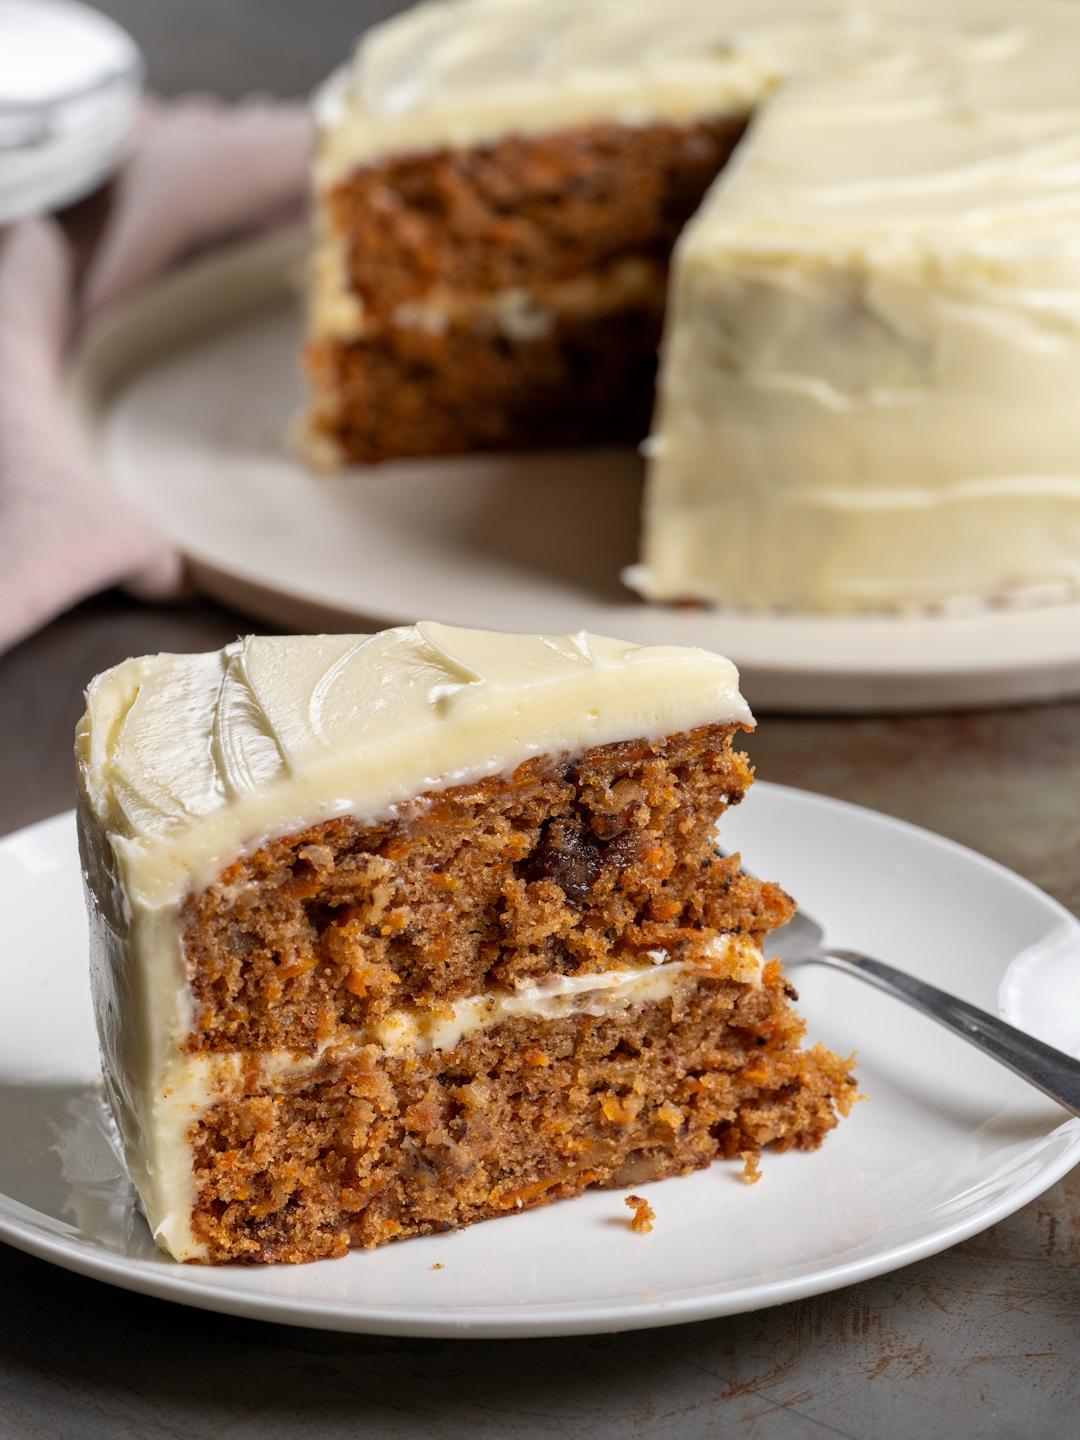 Kirsty's Carrot Cake